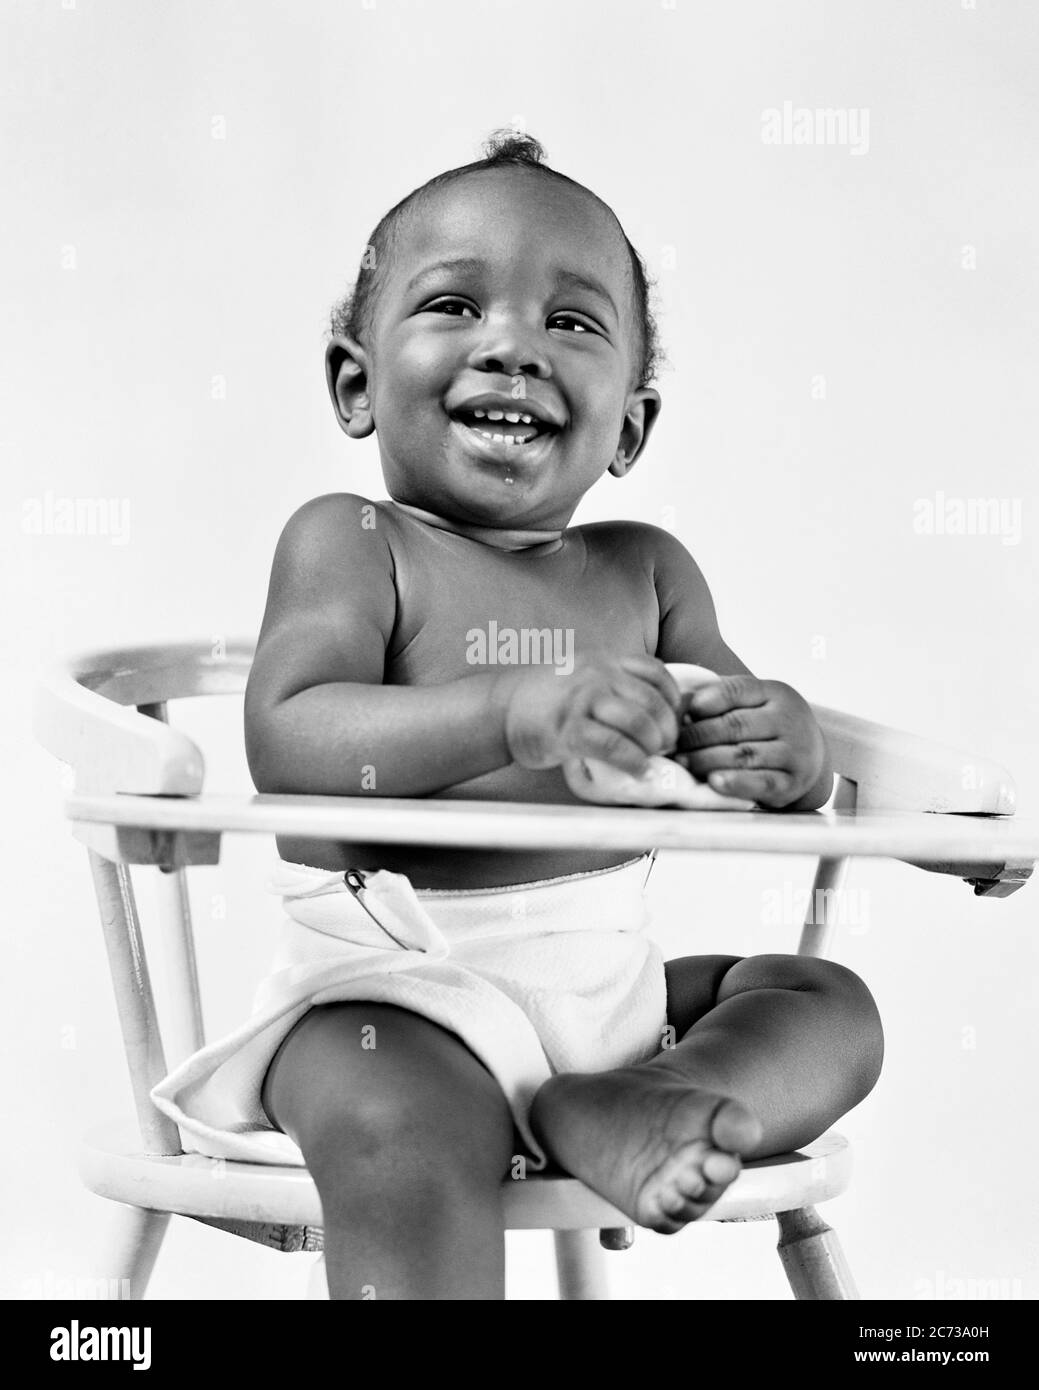 1940s SMILING LAUGHING AFRICAN AMERICAN BABY BOY WEARING SAFETY PINED COTTON DIAPER SITTING IN HIGH CHAIR LOOKING AT CAMERA  - n275 HAR001 HARS COPY SPACE FULL-LENGTH CLOTH MALES DIAPER B&W EYE CONTACT HAPPINESS CHEERFUL STRENGTH AFRICAN-AMERICANS AFRICAN-AMERICAN EXCITEMENT LOW ANGLE PROGRESS BLACK ETHNICITY PRIDE IN SMILES CONNECTION CONCEPTUAL JOYFUL STYLISH BABY BOY GROWTH JUVENILES SAFETY PIN BLACK AND WHITE HAR001 OLD FASHIONED AFRICAN AMERICANS Stock Photo